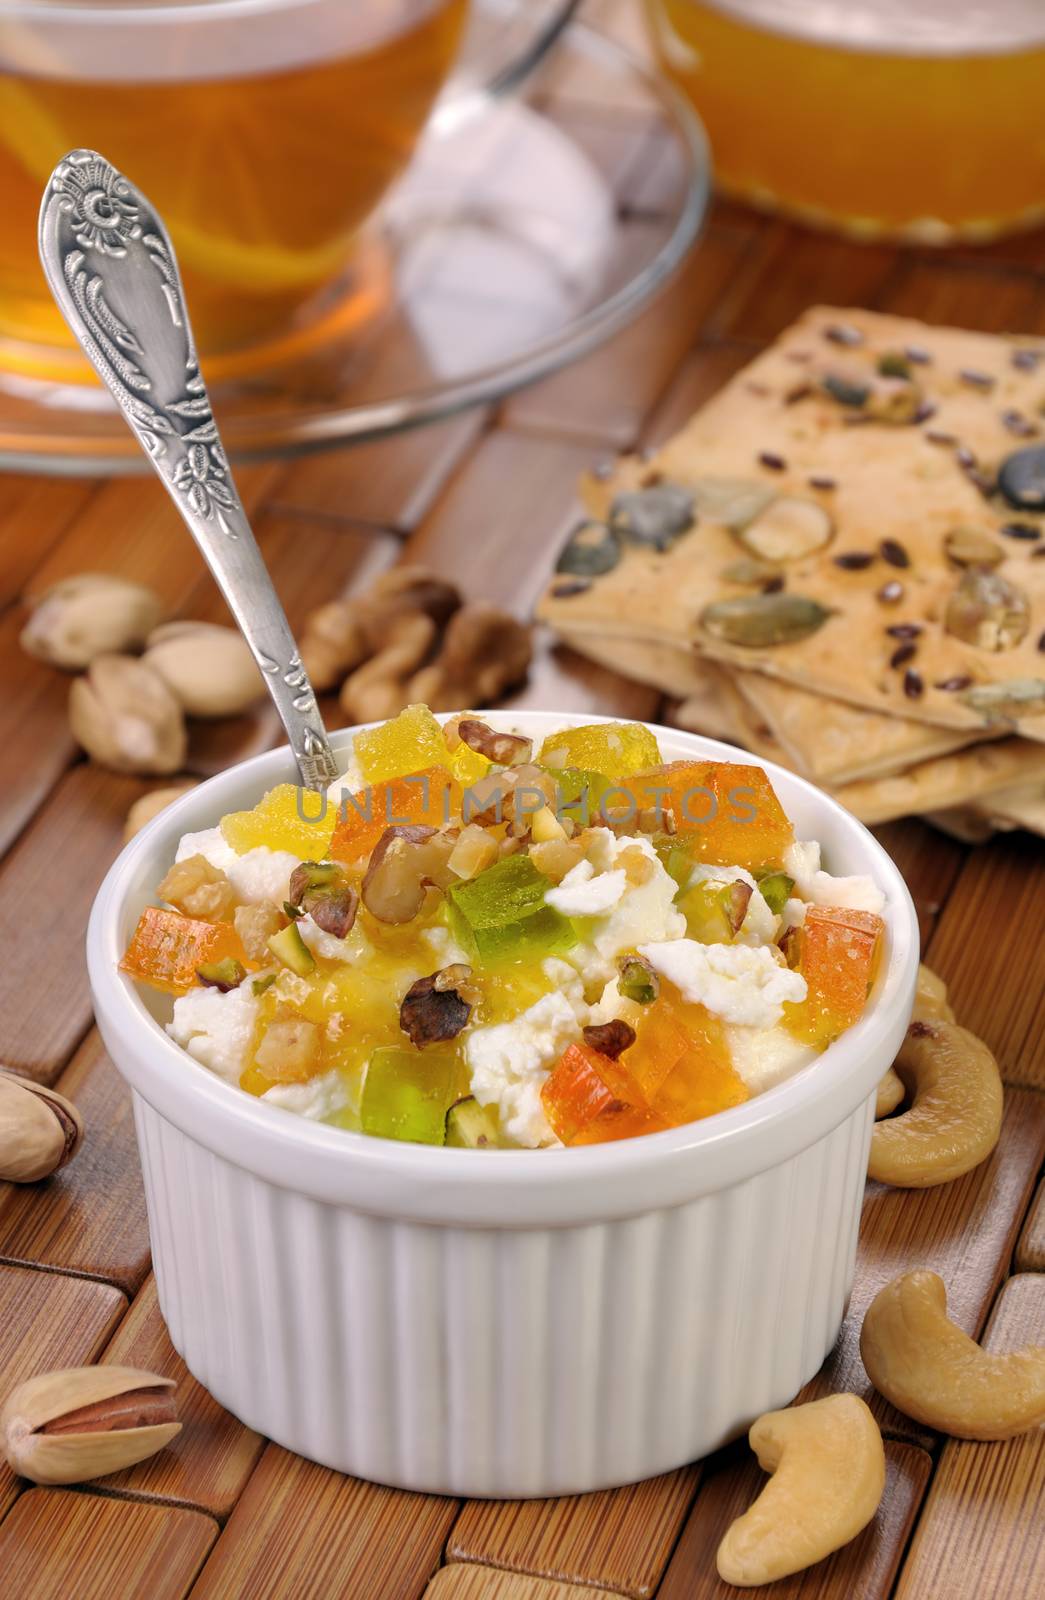 portion of cottage cheese with jam and marmalade slices, nuts, pistachios